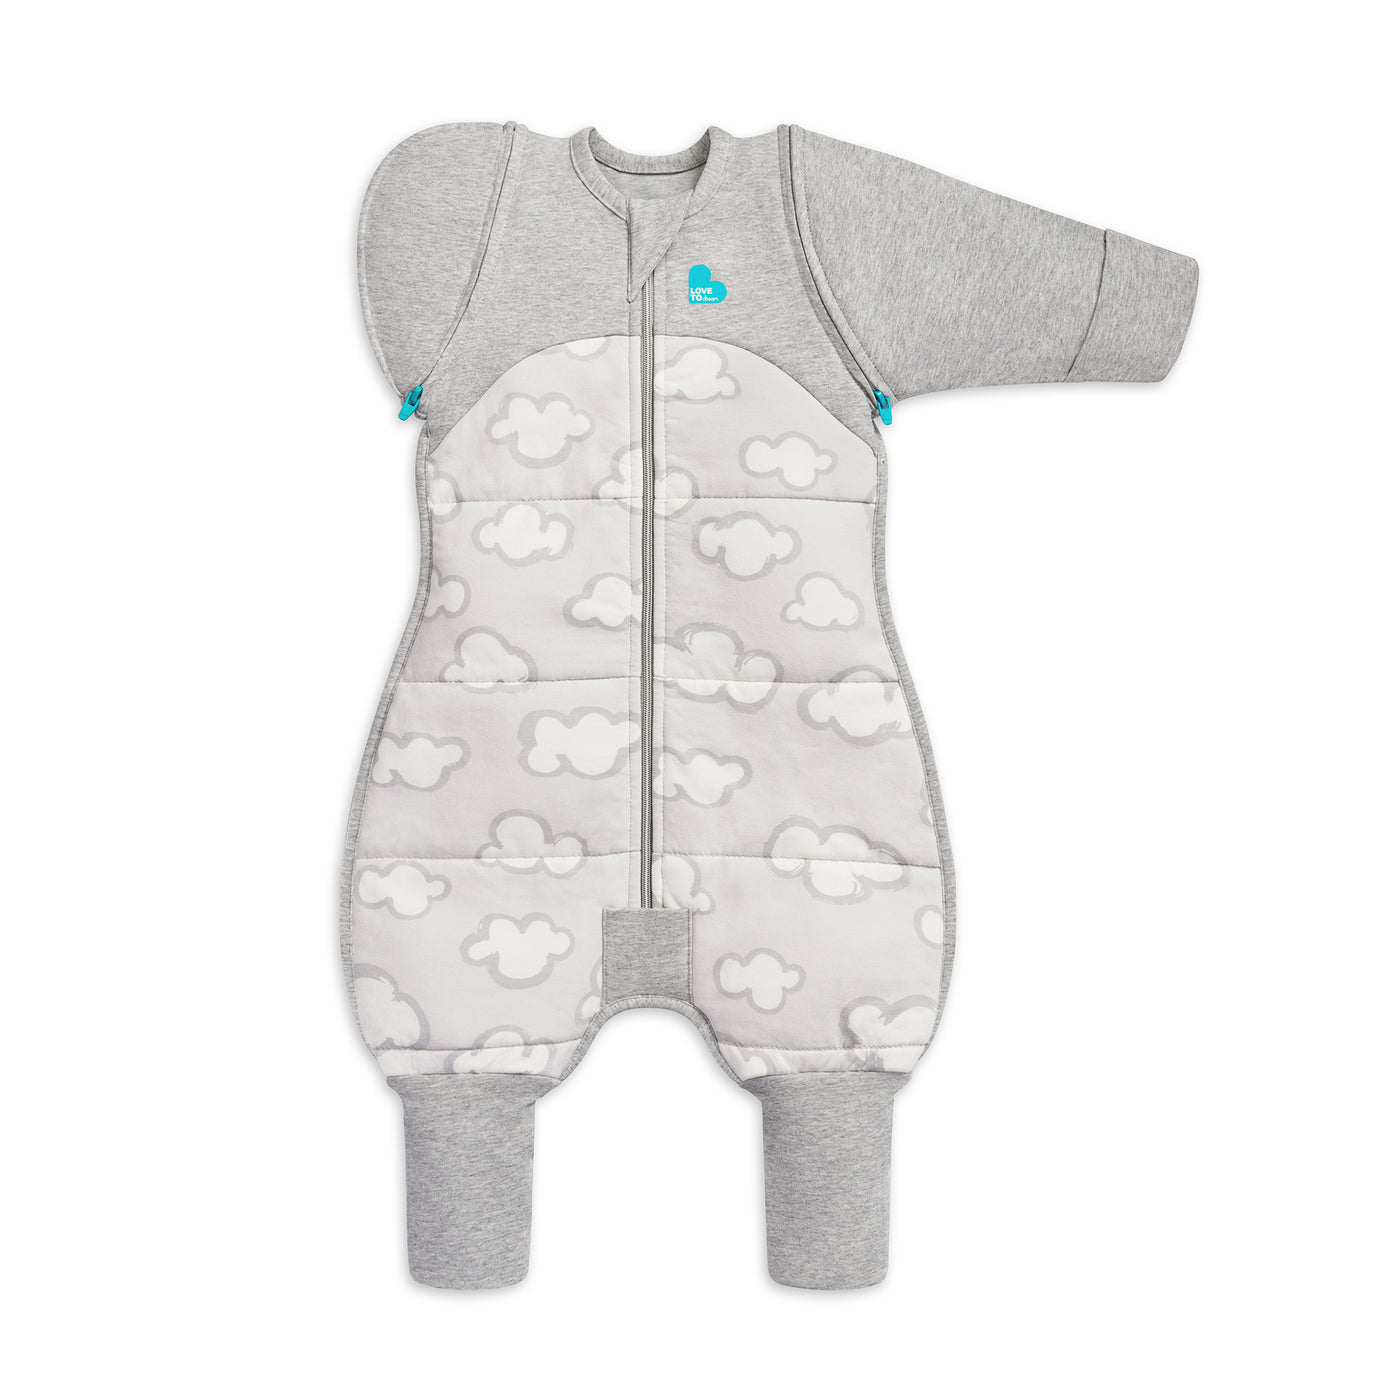 Swaddle Up™ Transition Suit Cool 2.5 TOG - Daydream Grey